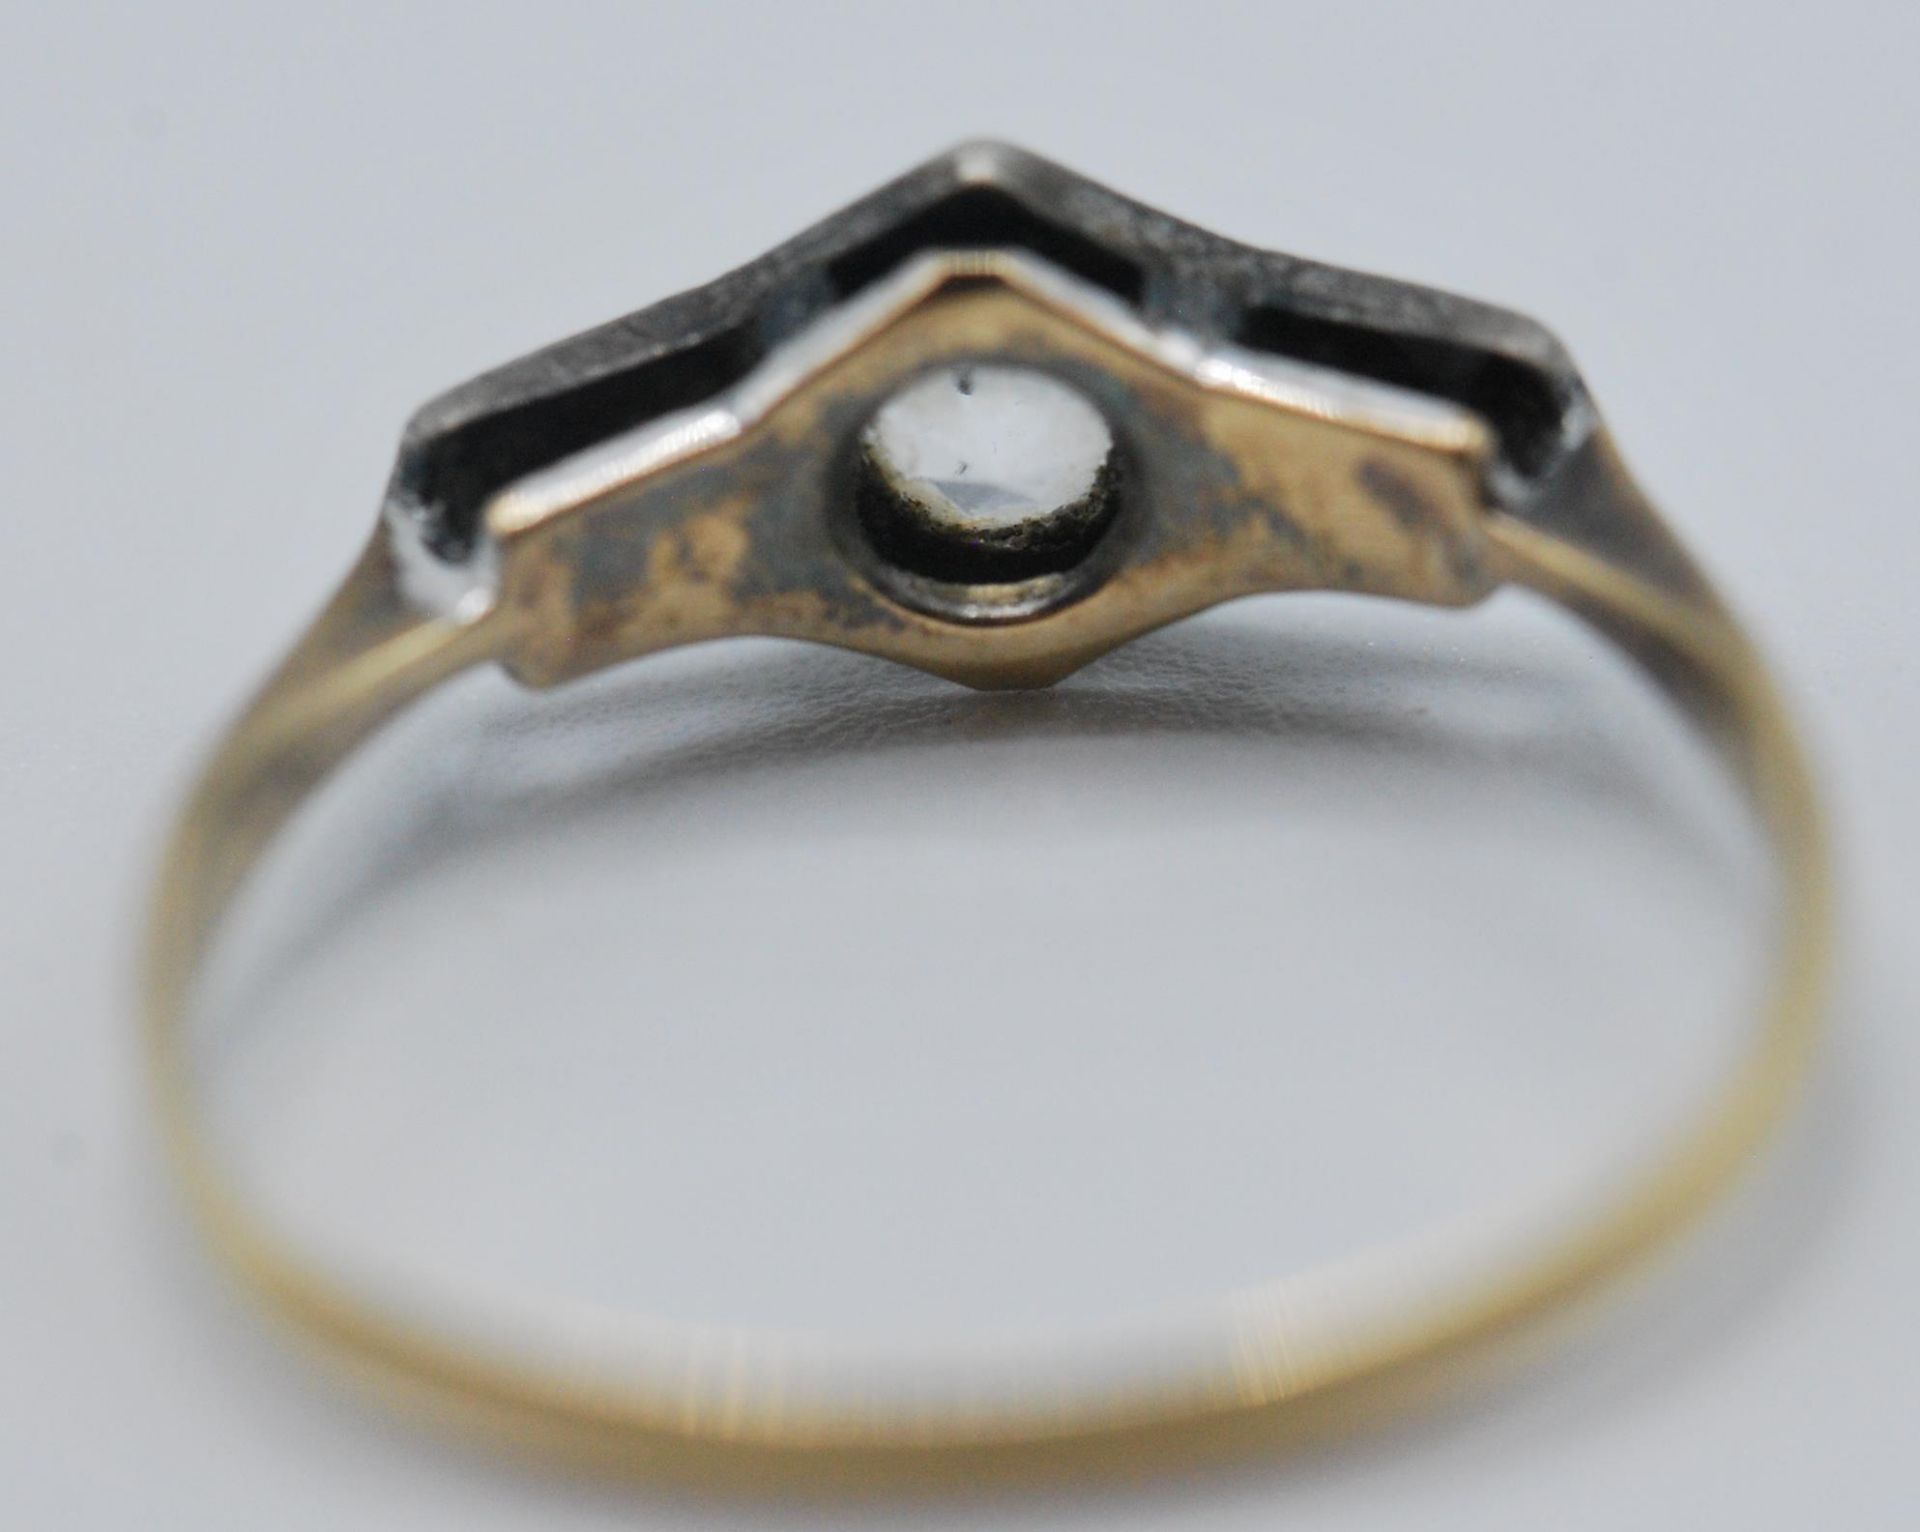 9CT GOLD AND SILVER ART DECO RING - Image 4 of 7